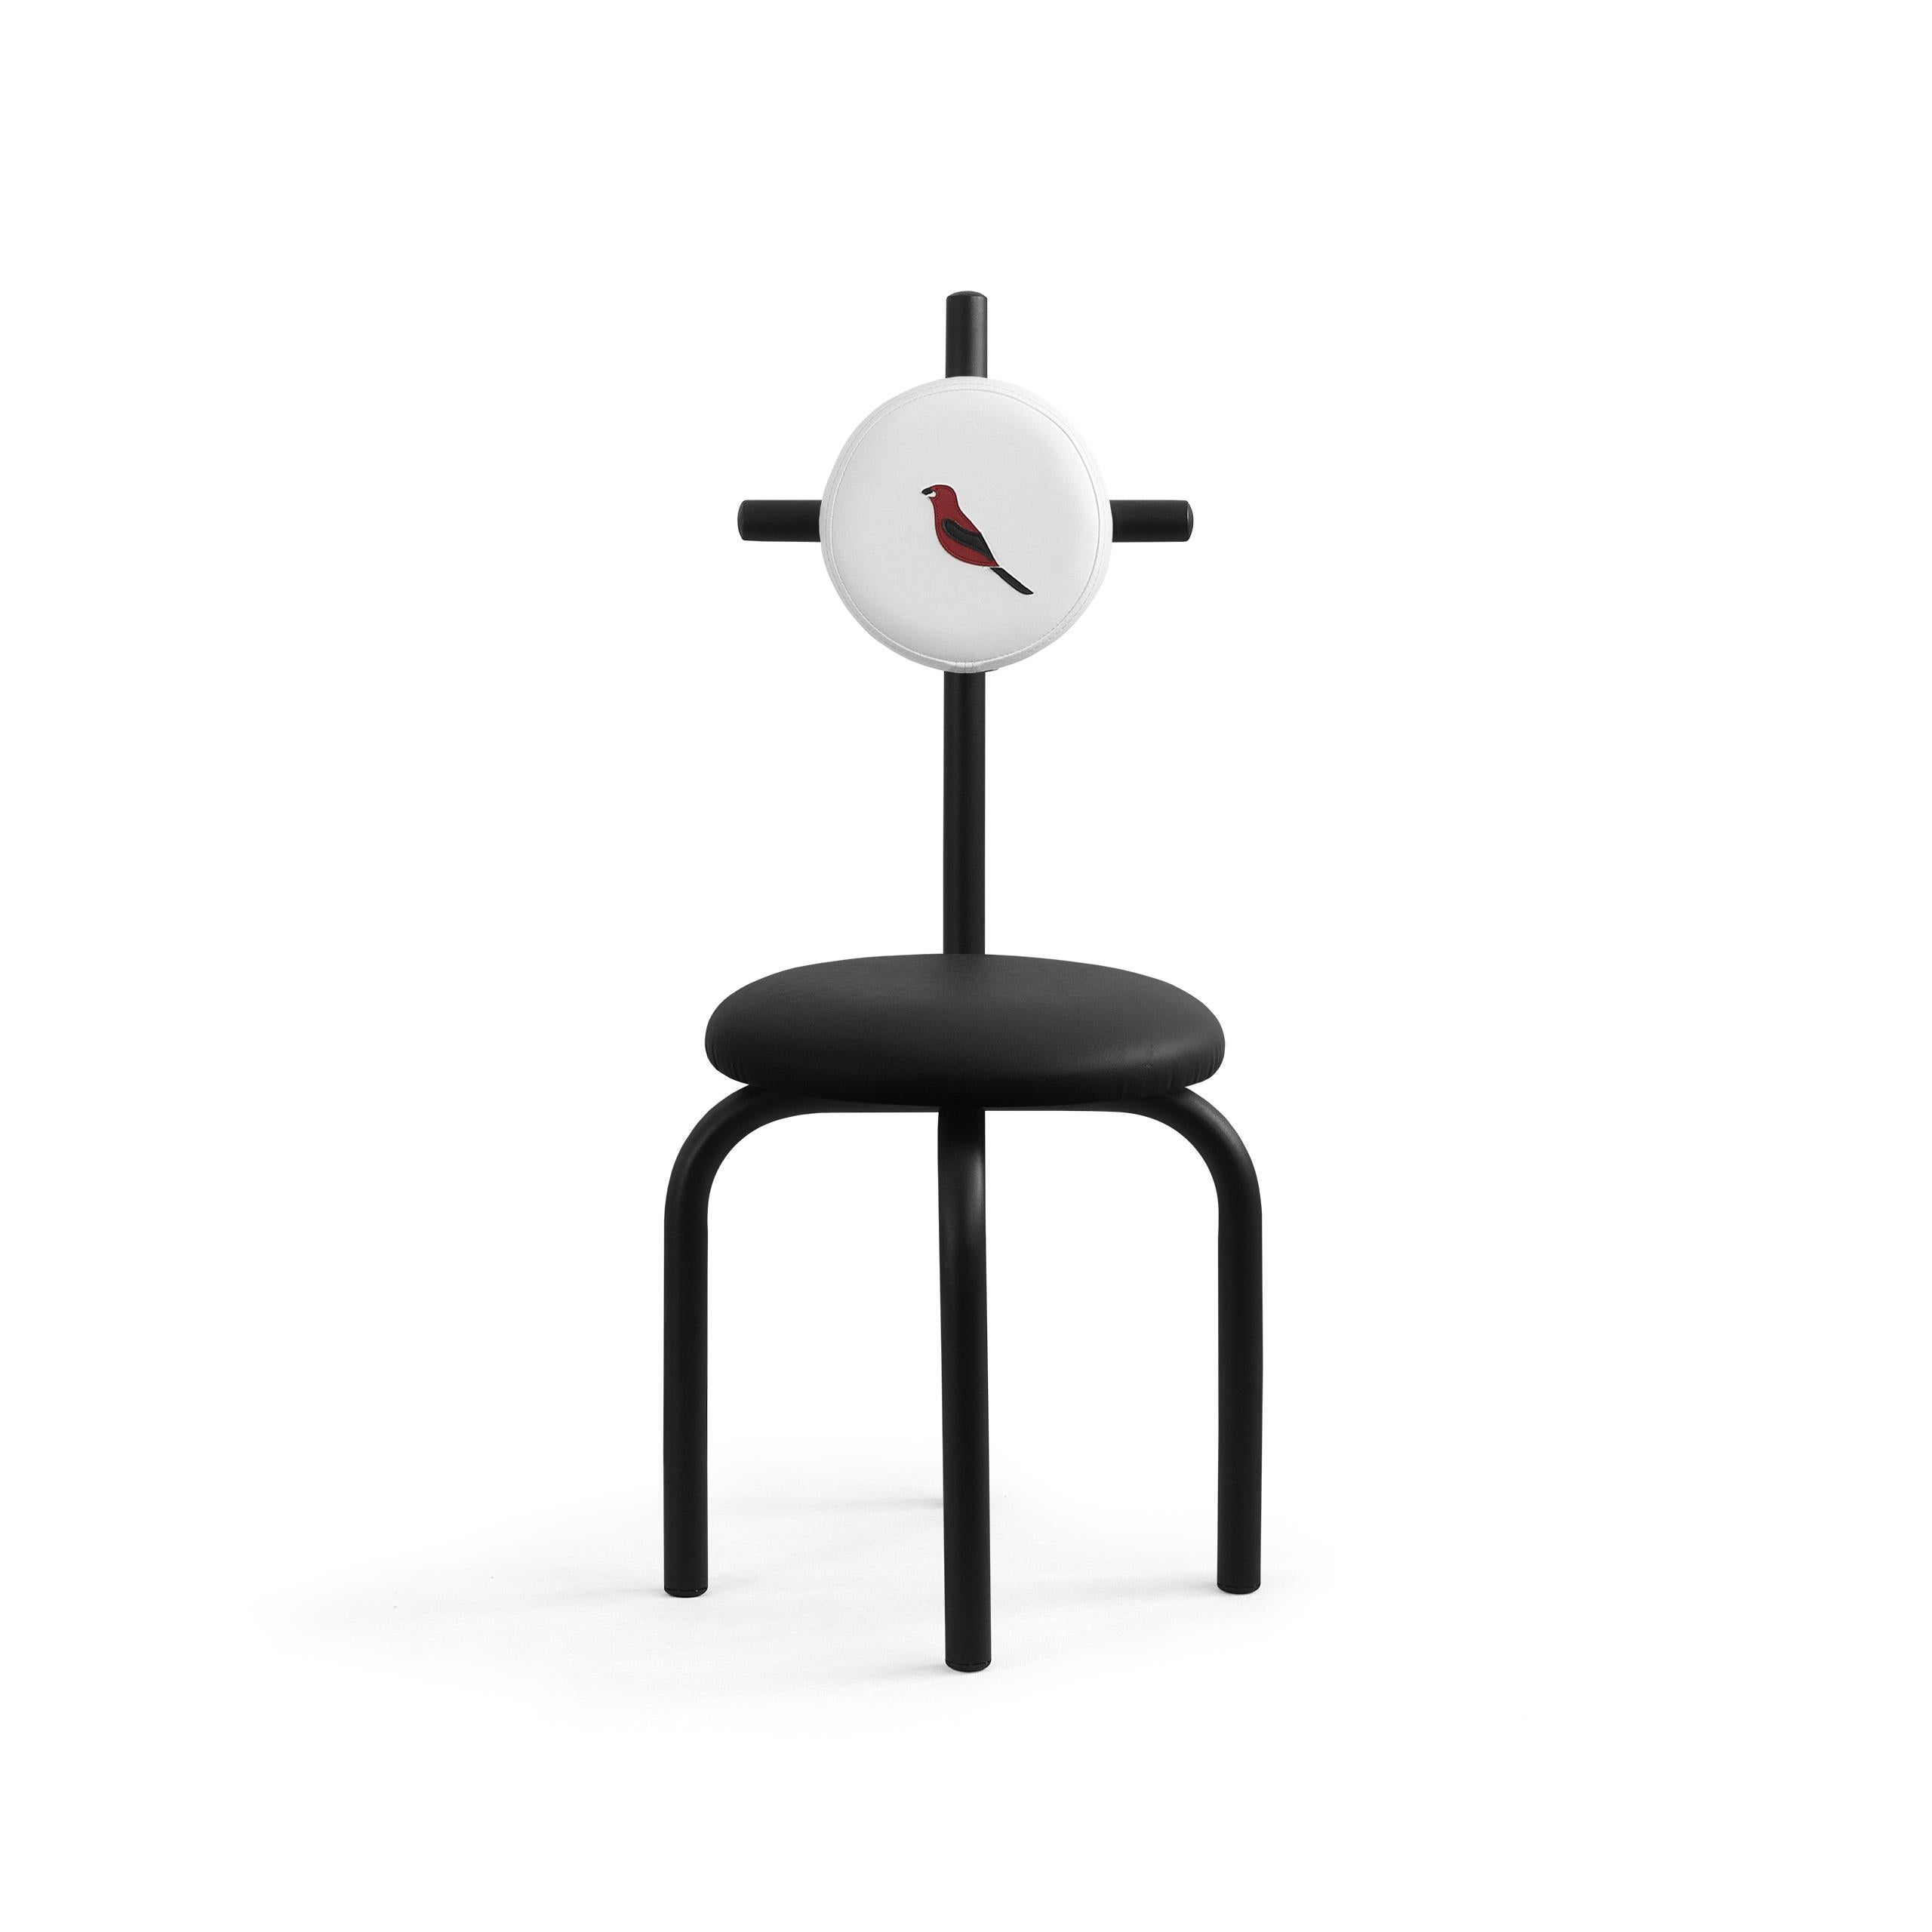 PK16 chair is handcrafted in tubular carbon steel and is finished in black micro-textured electrostatic painting.
Seat and backrest are upholstered in nautical anti-mold leatherette over naval plywood.
The seat has no seams and its rounded shape